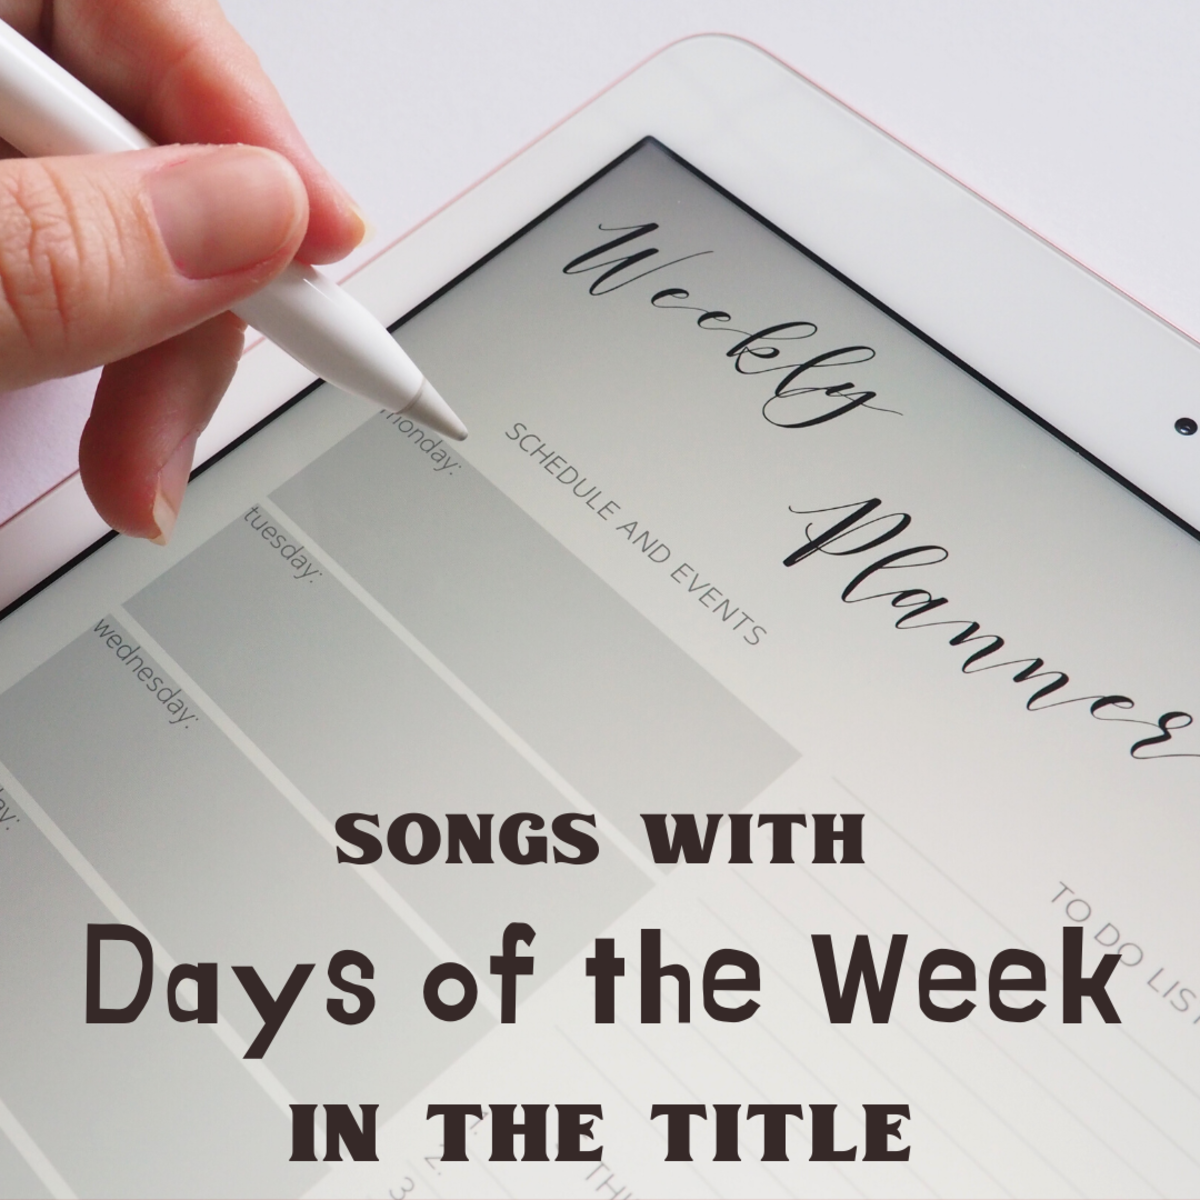 100 Best Songs With Days of the Week in the Title